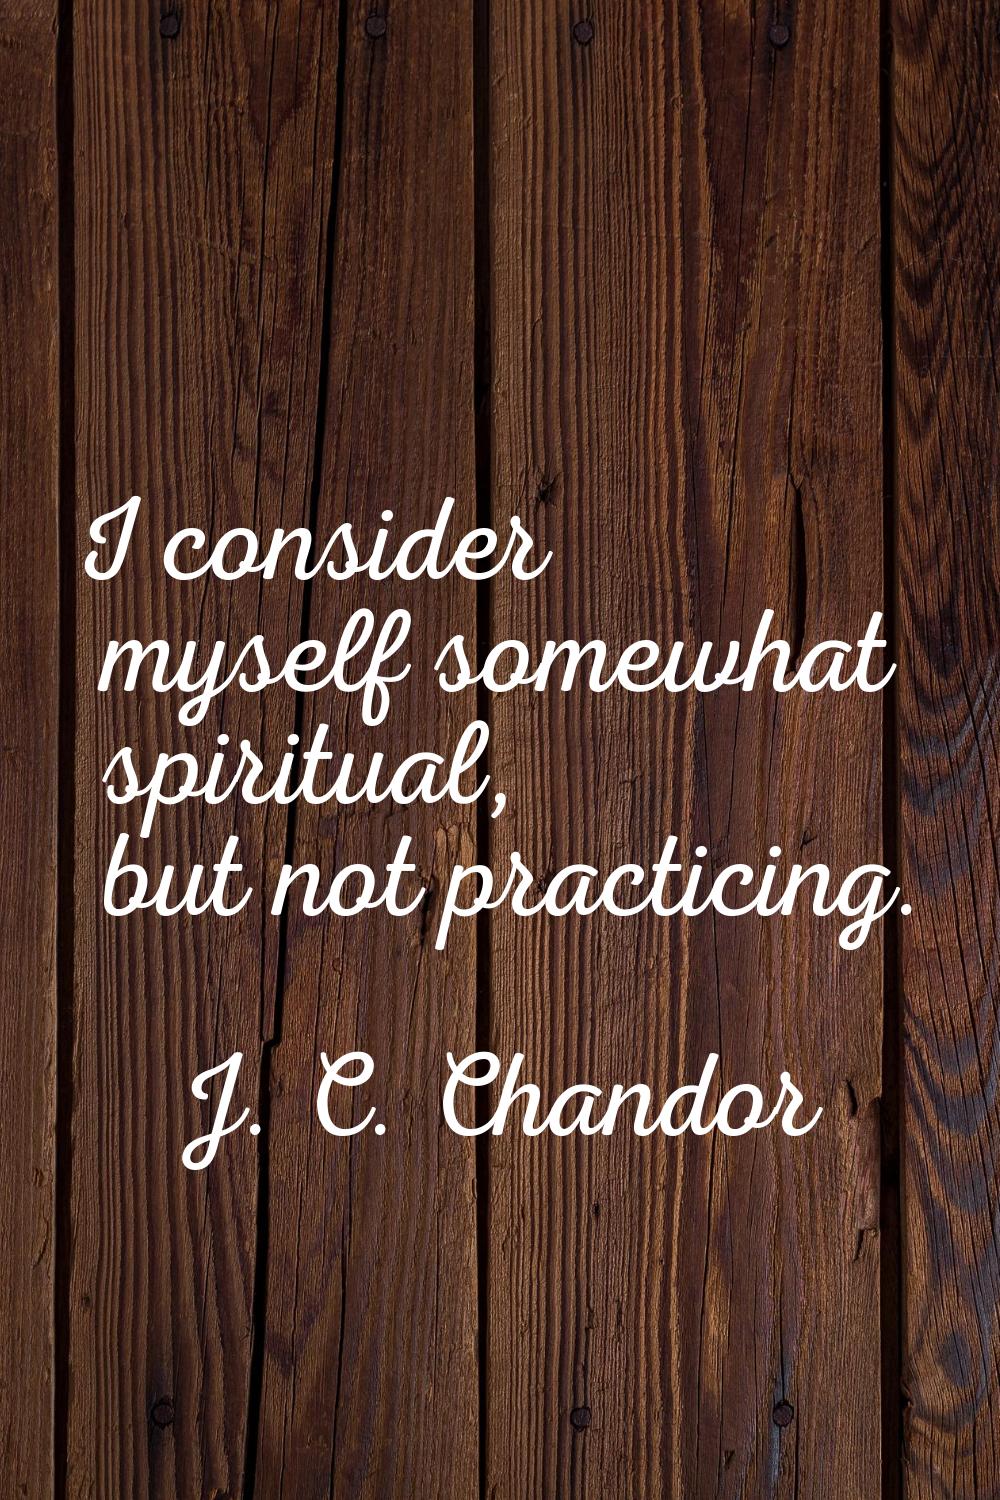 I consider myself somewhat spiritual, but not practicing.